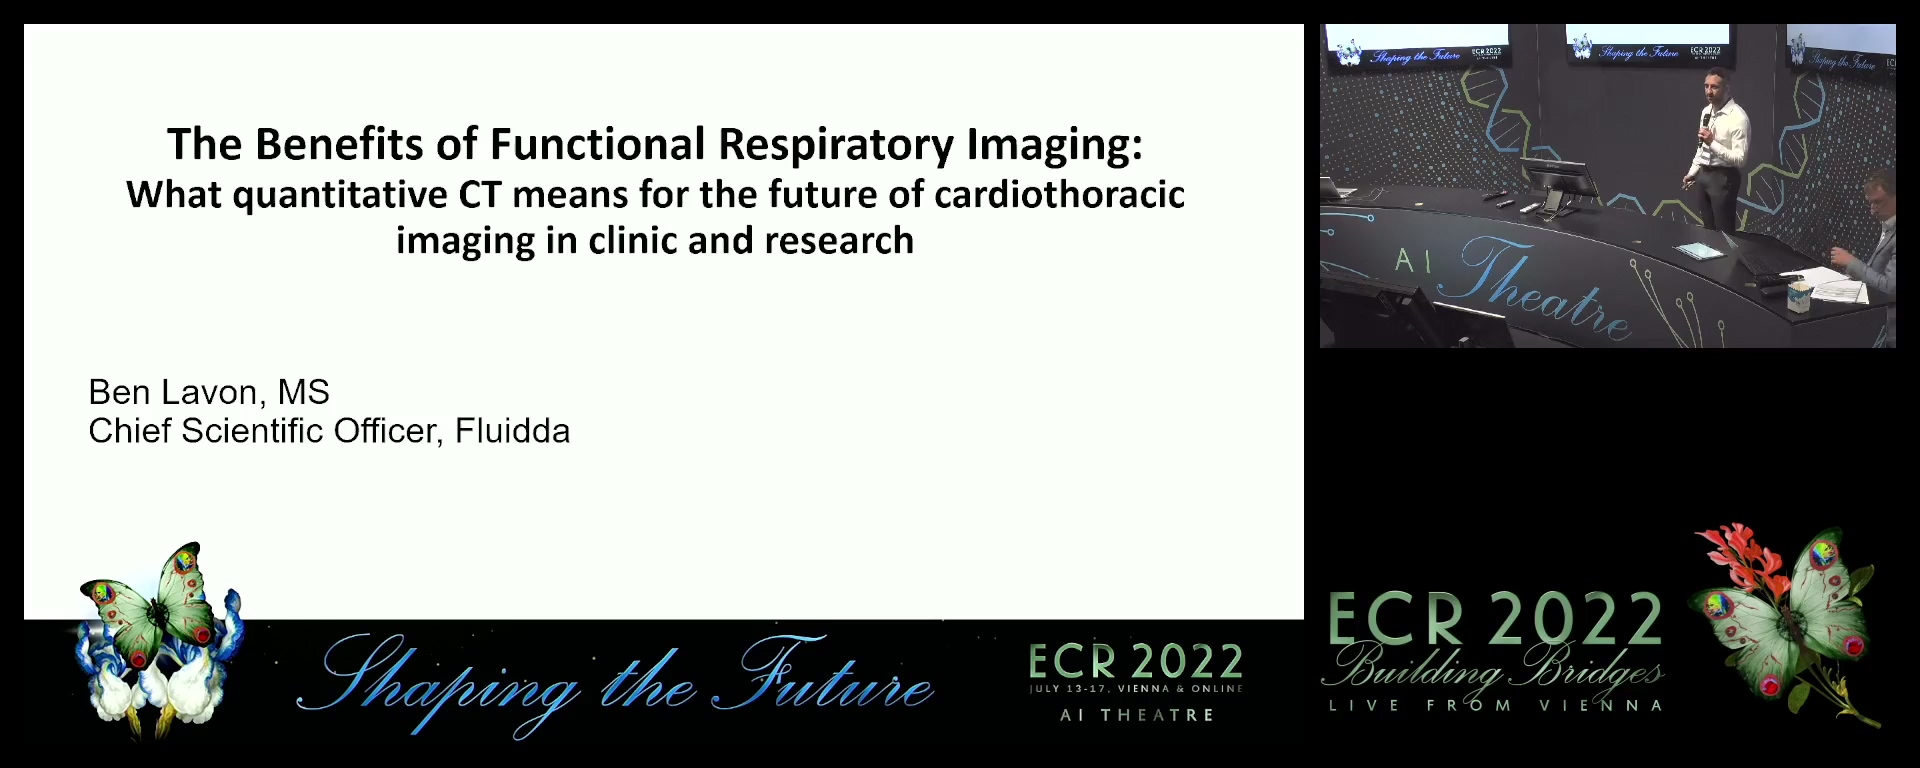 The Benefits of Functional Respiratory Imaging: What quantitative CT means for the future of cardiothoracic imaging in clinic and research